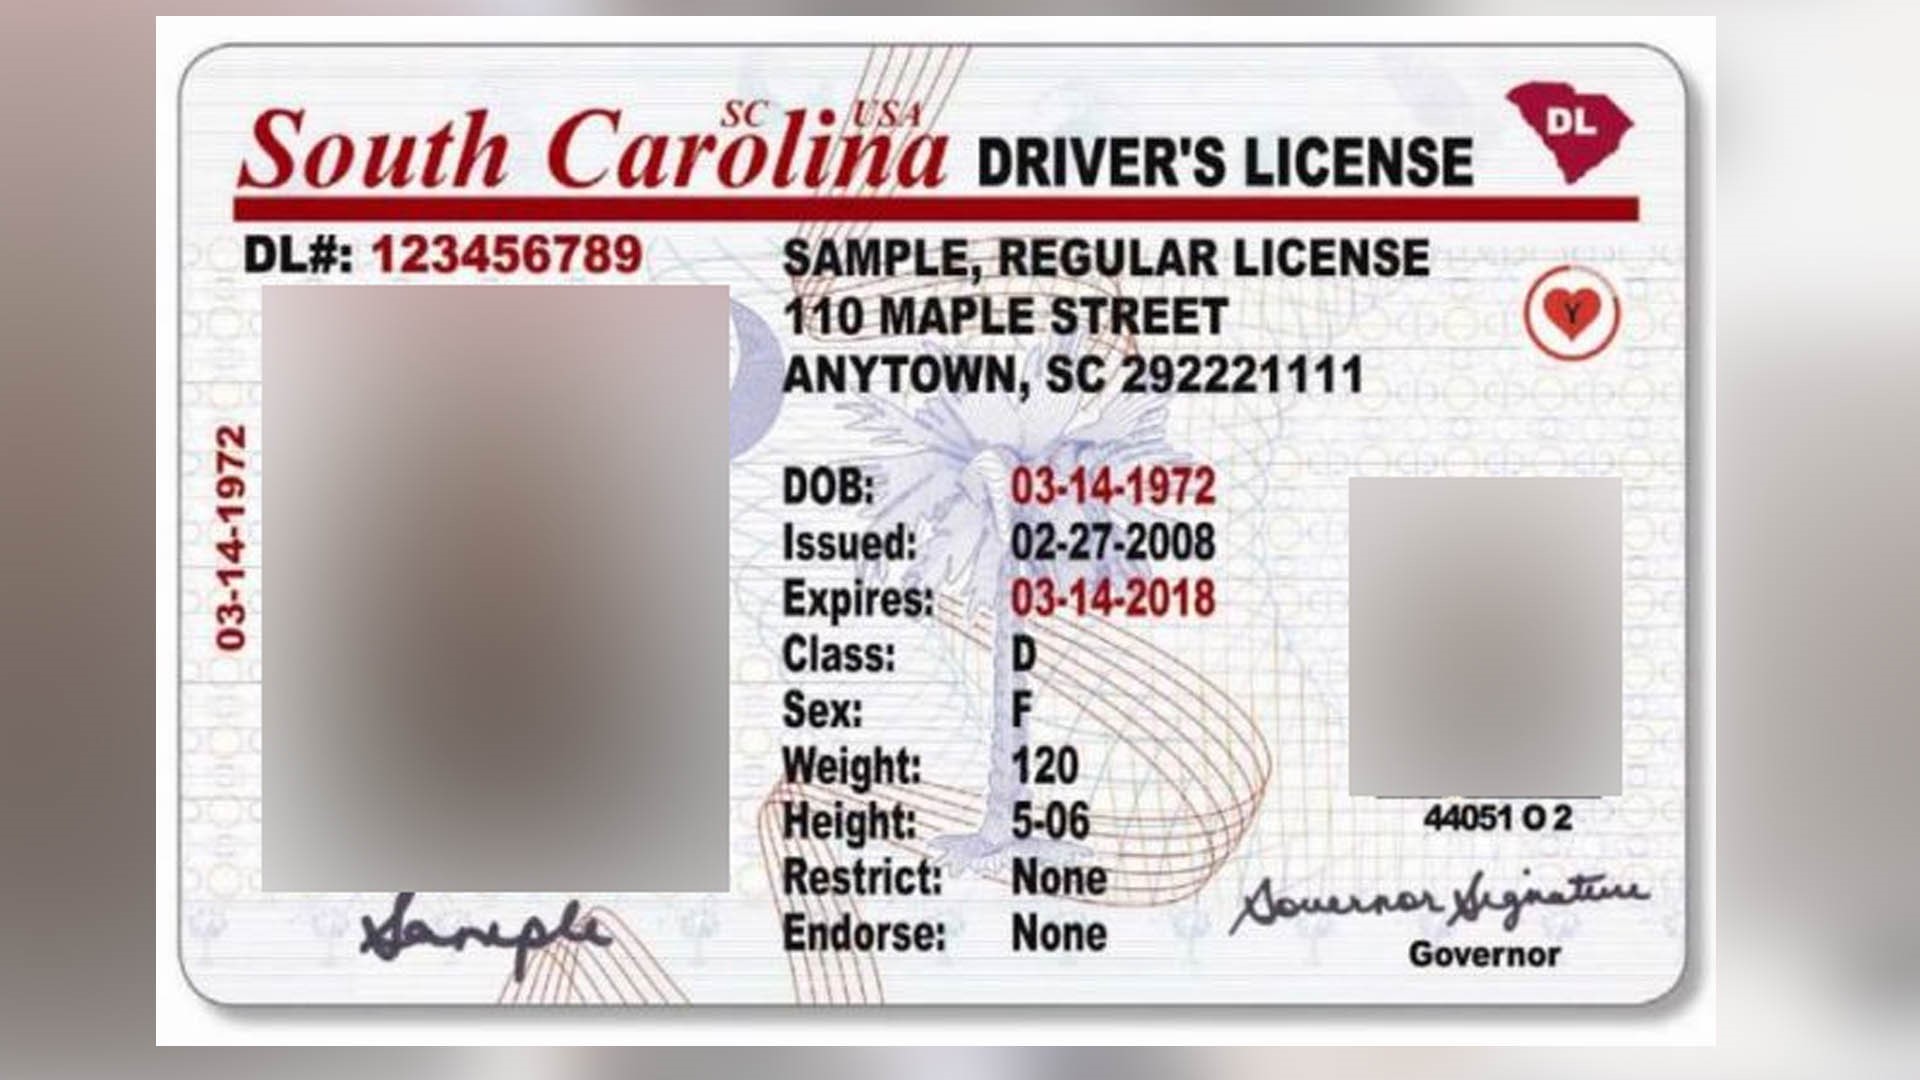 online-driver-s-license-renewal-now-available-for-most-sc-drivers